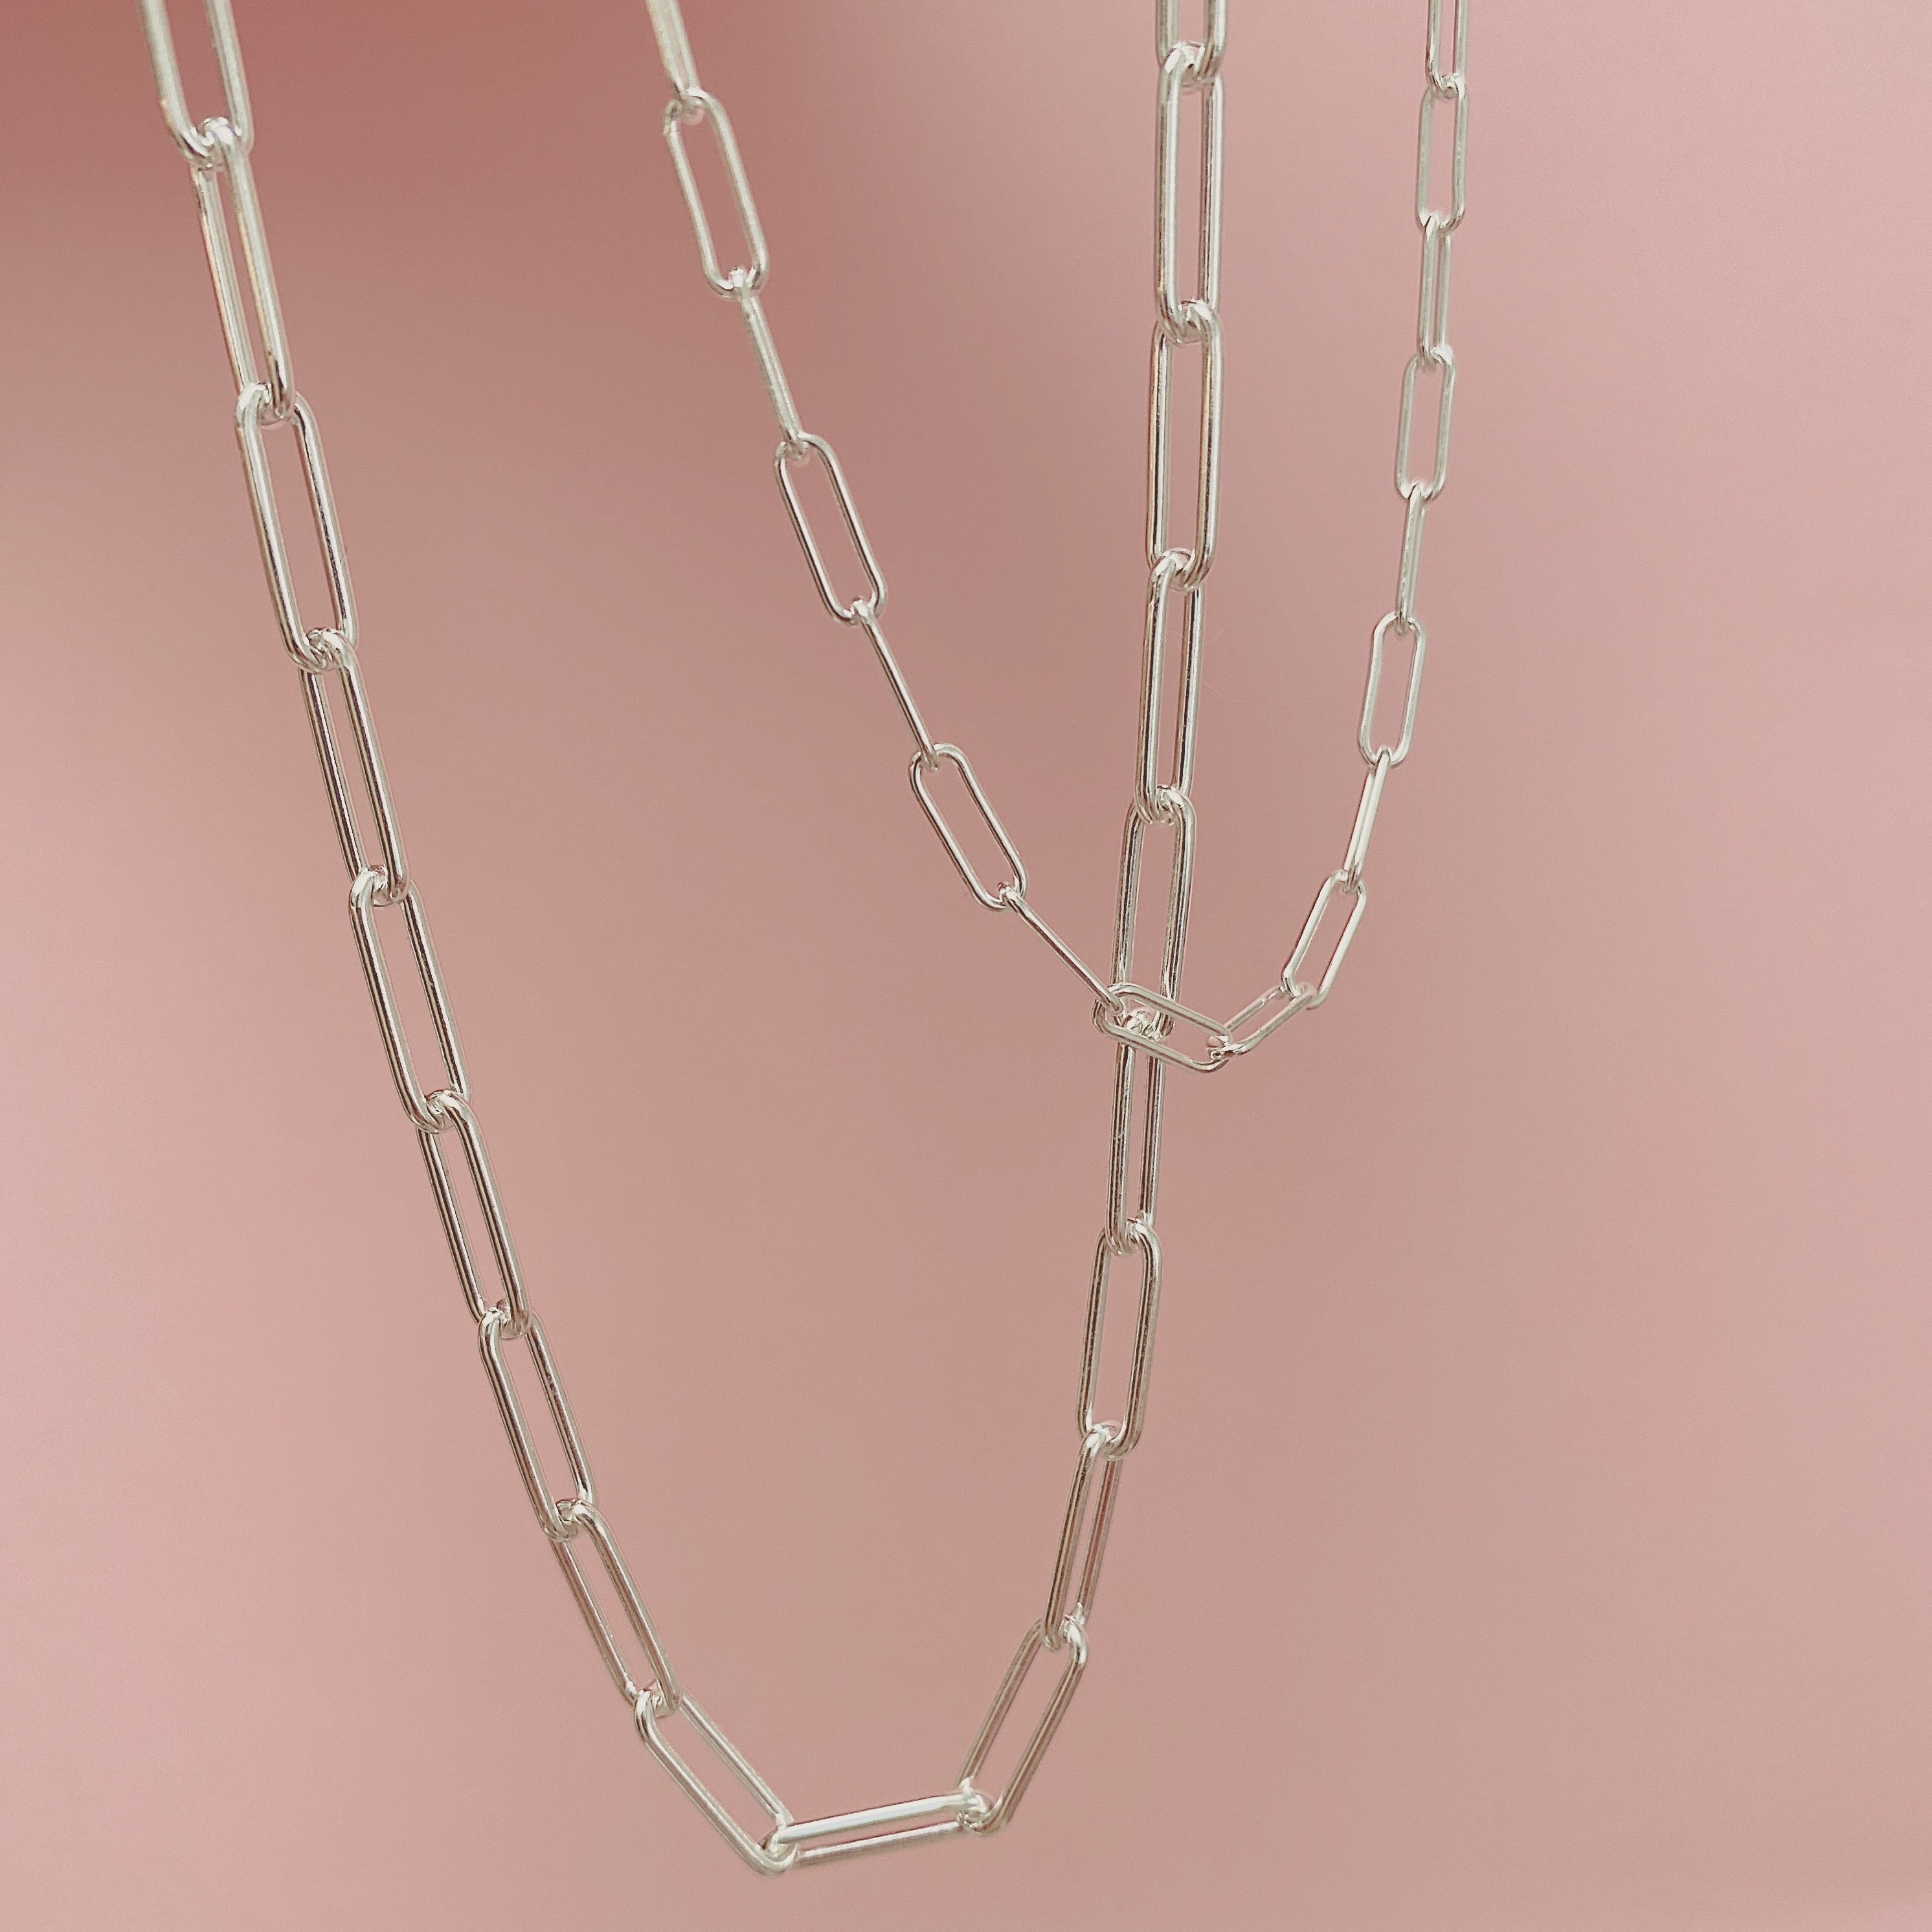 The Paperclip Chain 1.0